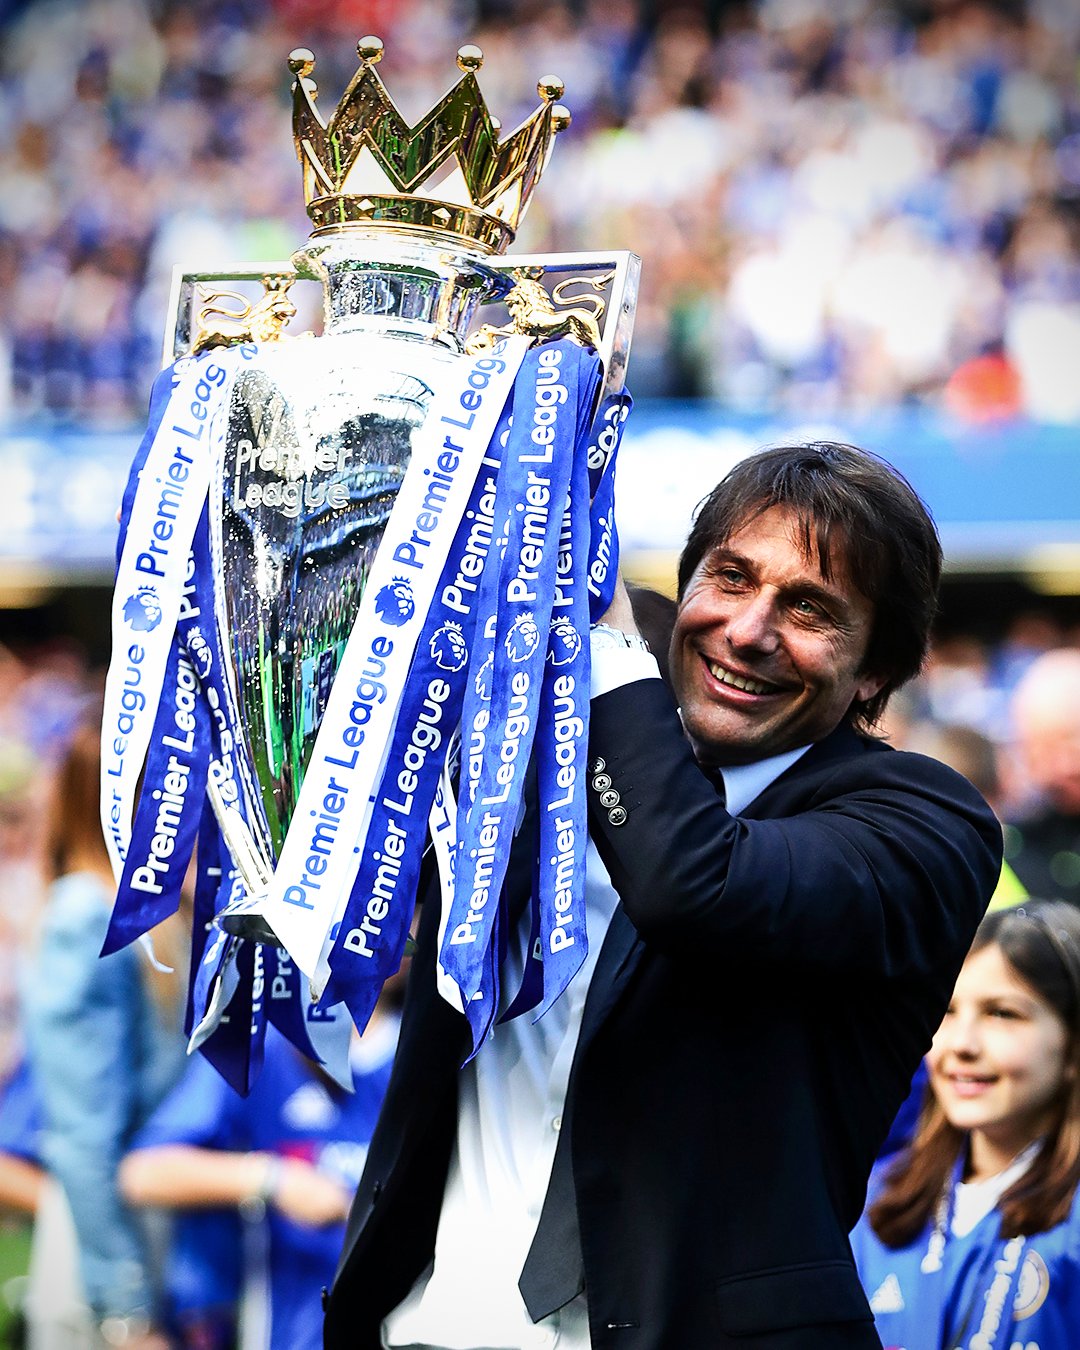 B/R Football on X: "Antonio Conte is back in the Premier League, where he already proved his worth with Chelsea 🏆 [THREAD] https://t.co/5JfYtVehlD" / X